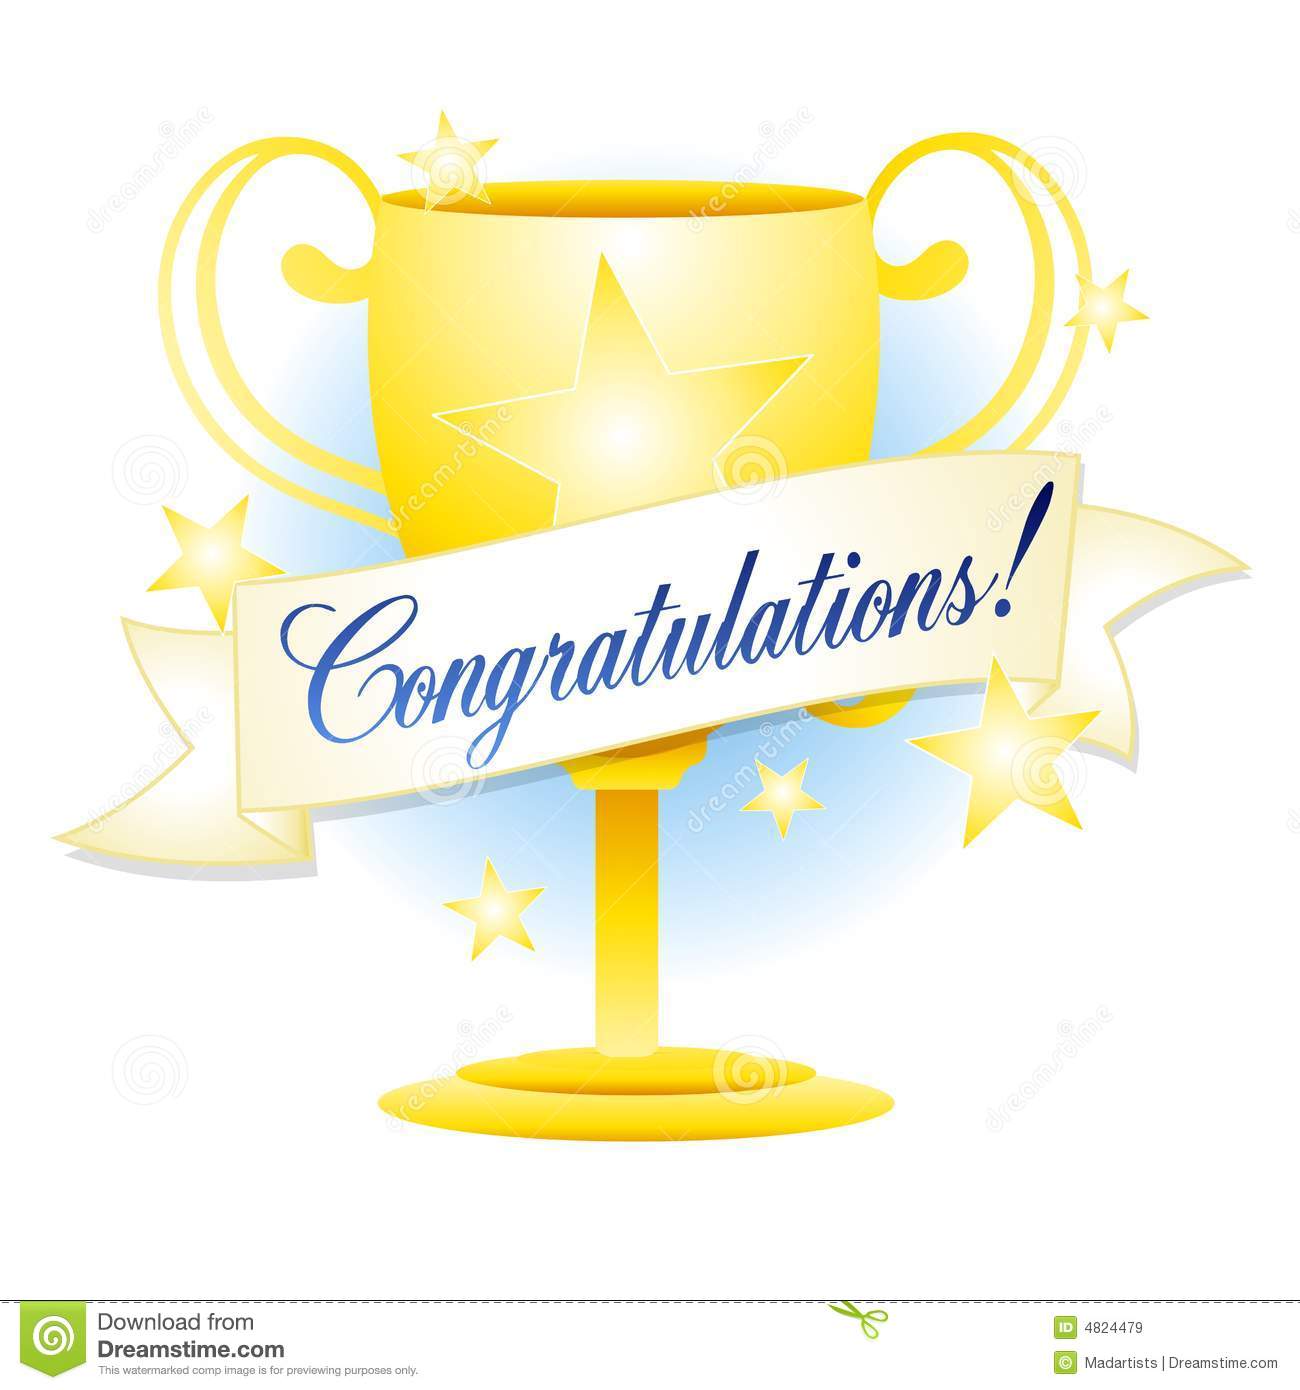 Gold Trophy Congratulations Royalty Free Stock Images   Image  4824479